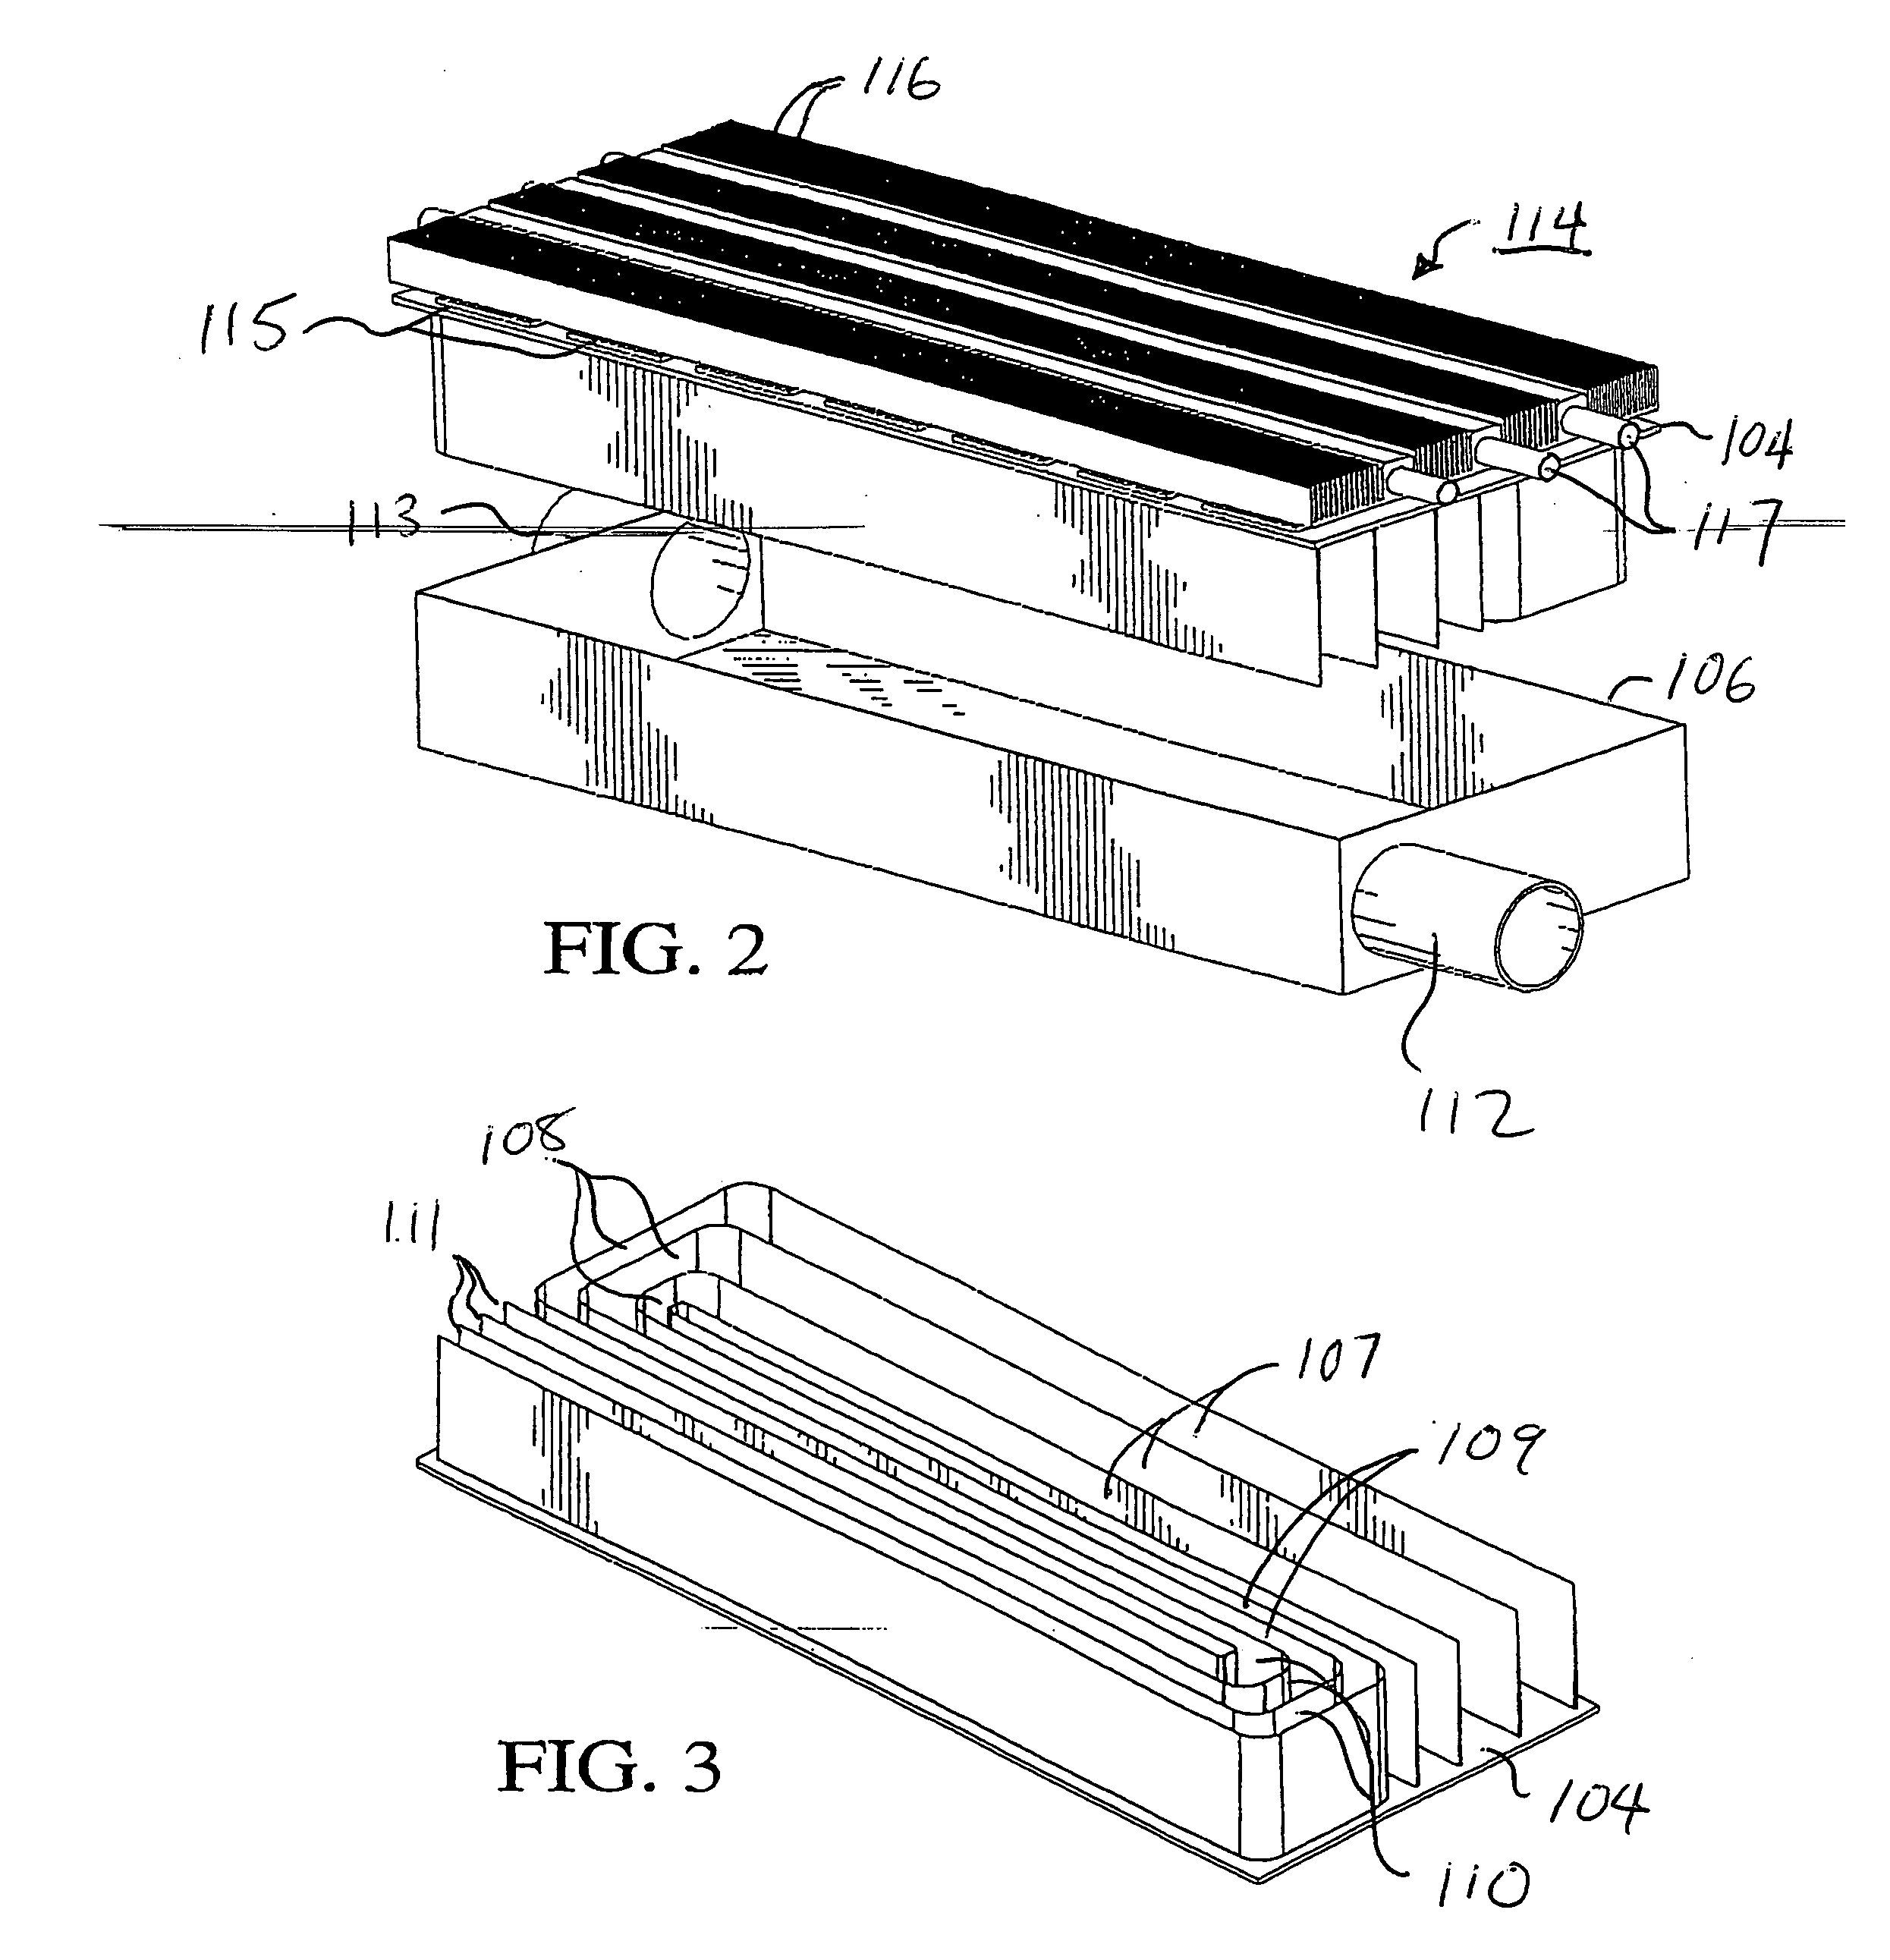 Flow-through mufflers with optional thermo-electric, sound cancellation, and tuning capabilities